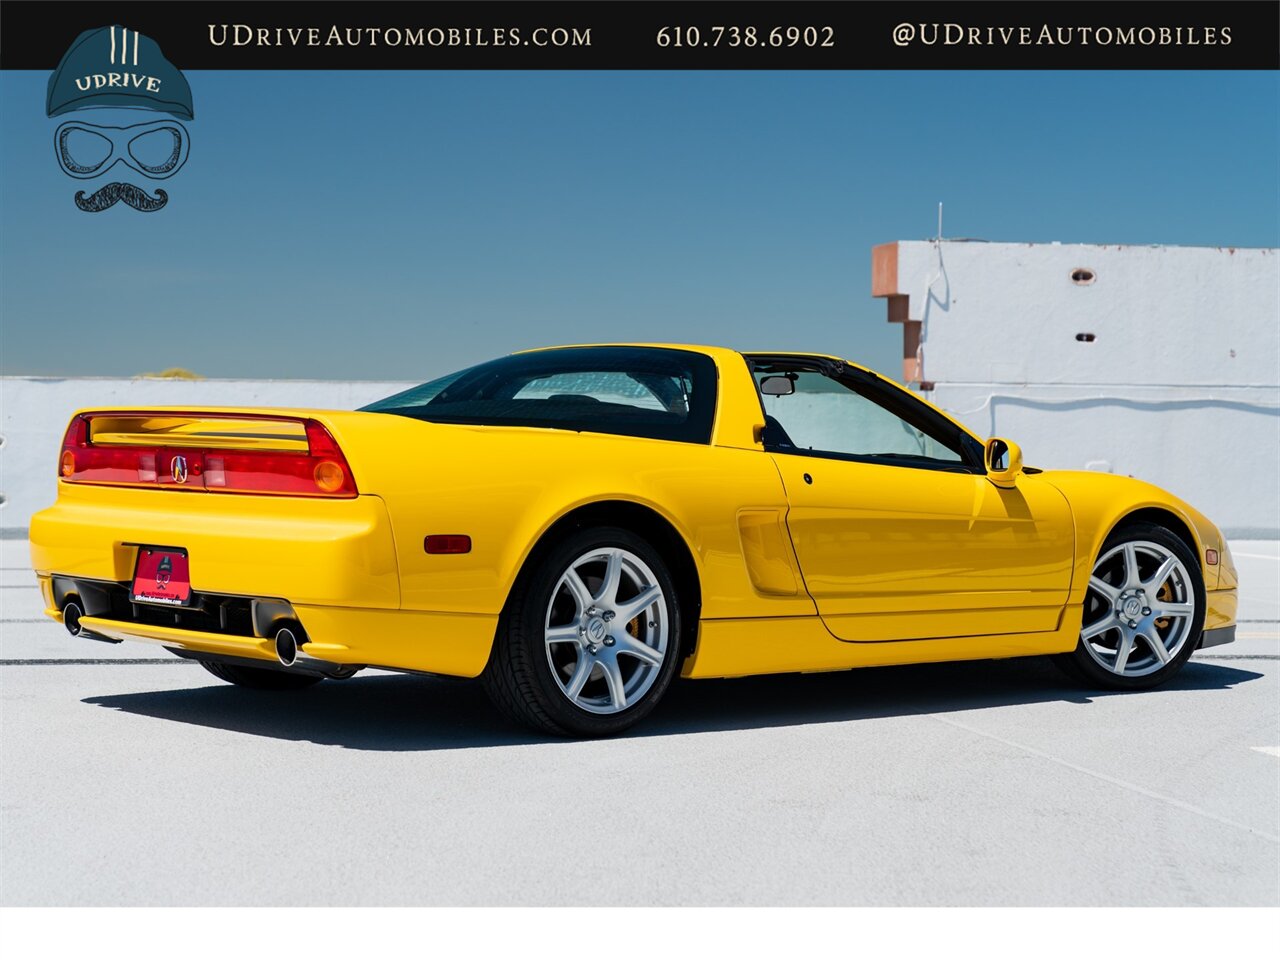 2003 Acura NSX NSX-T  Spa Yellow over Yellow Lthr 1 of 13 Produced - Photo 28 - West Chester, PA 19382